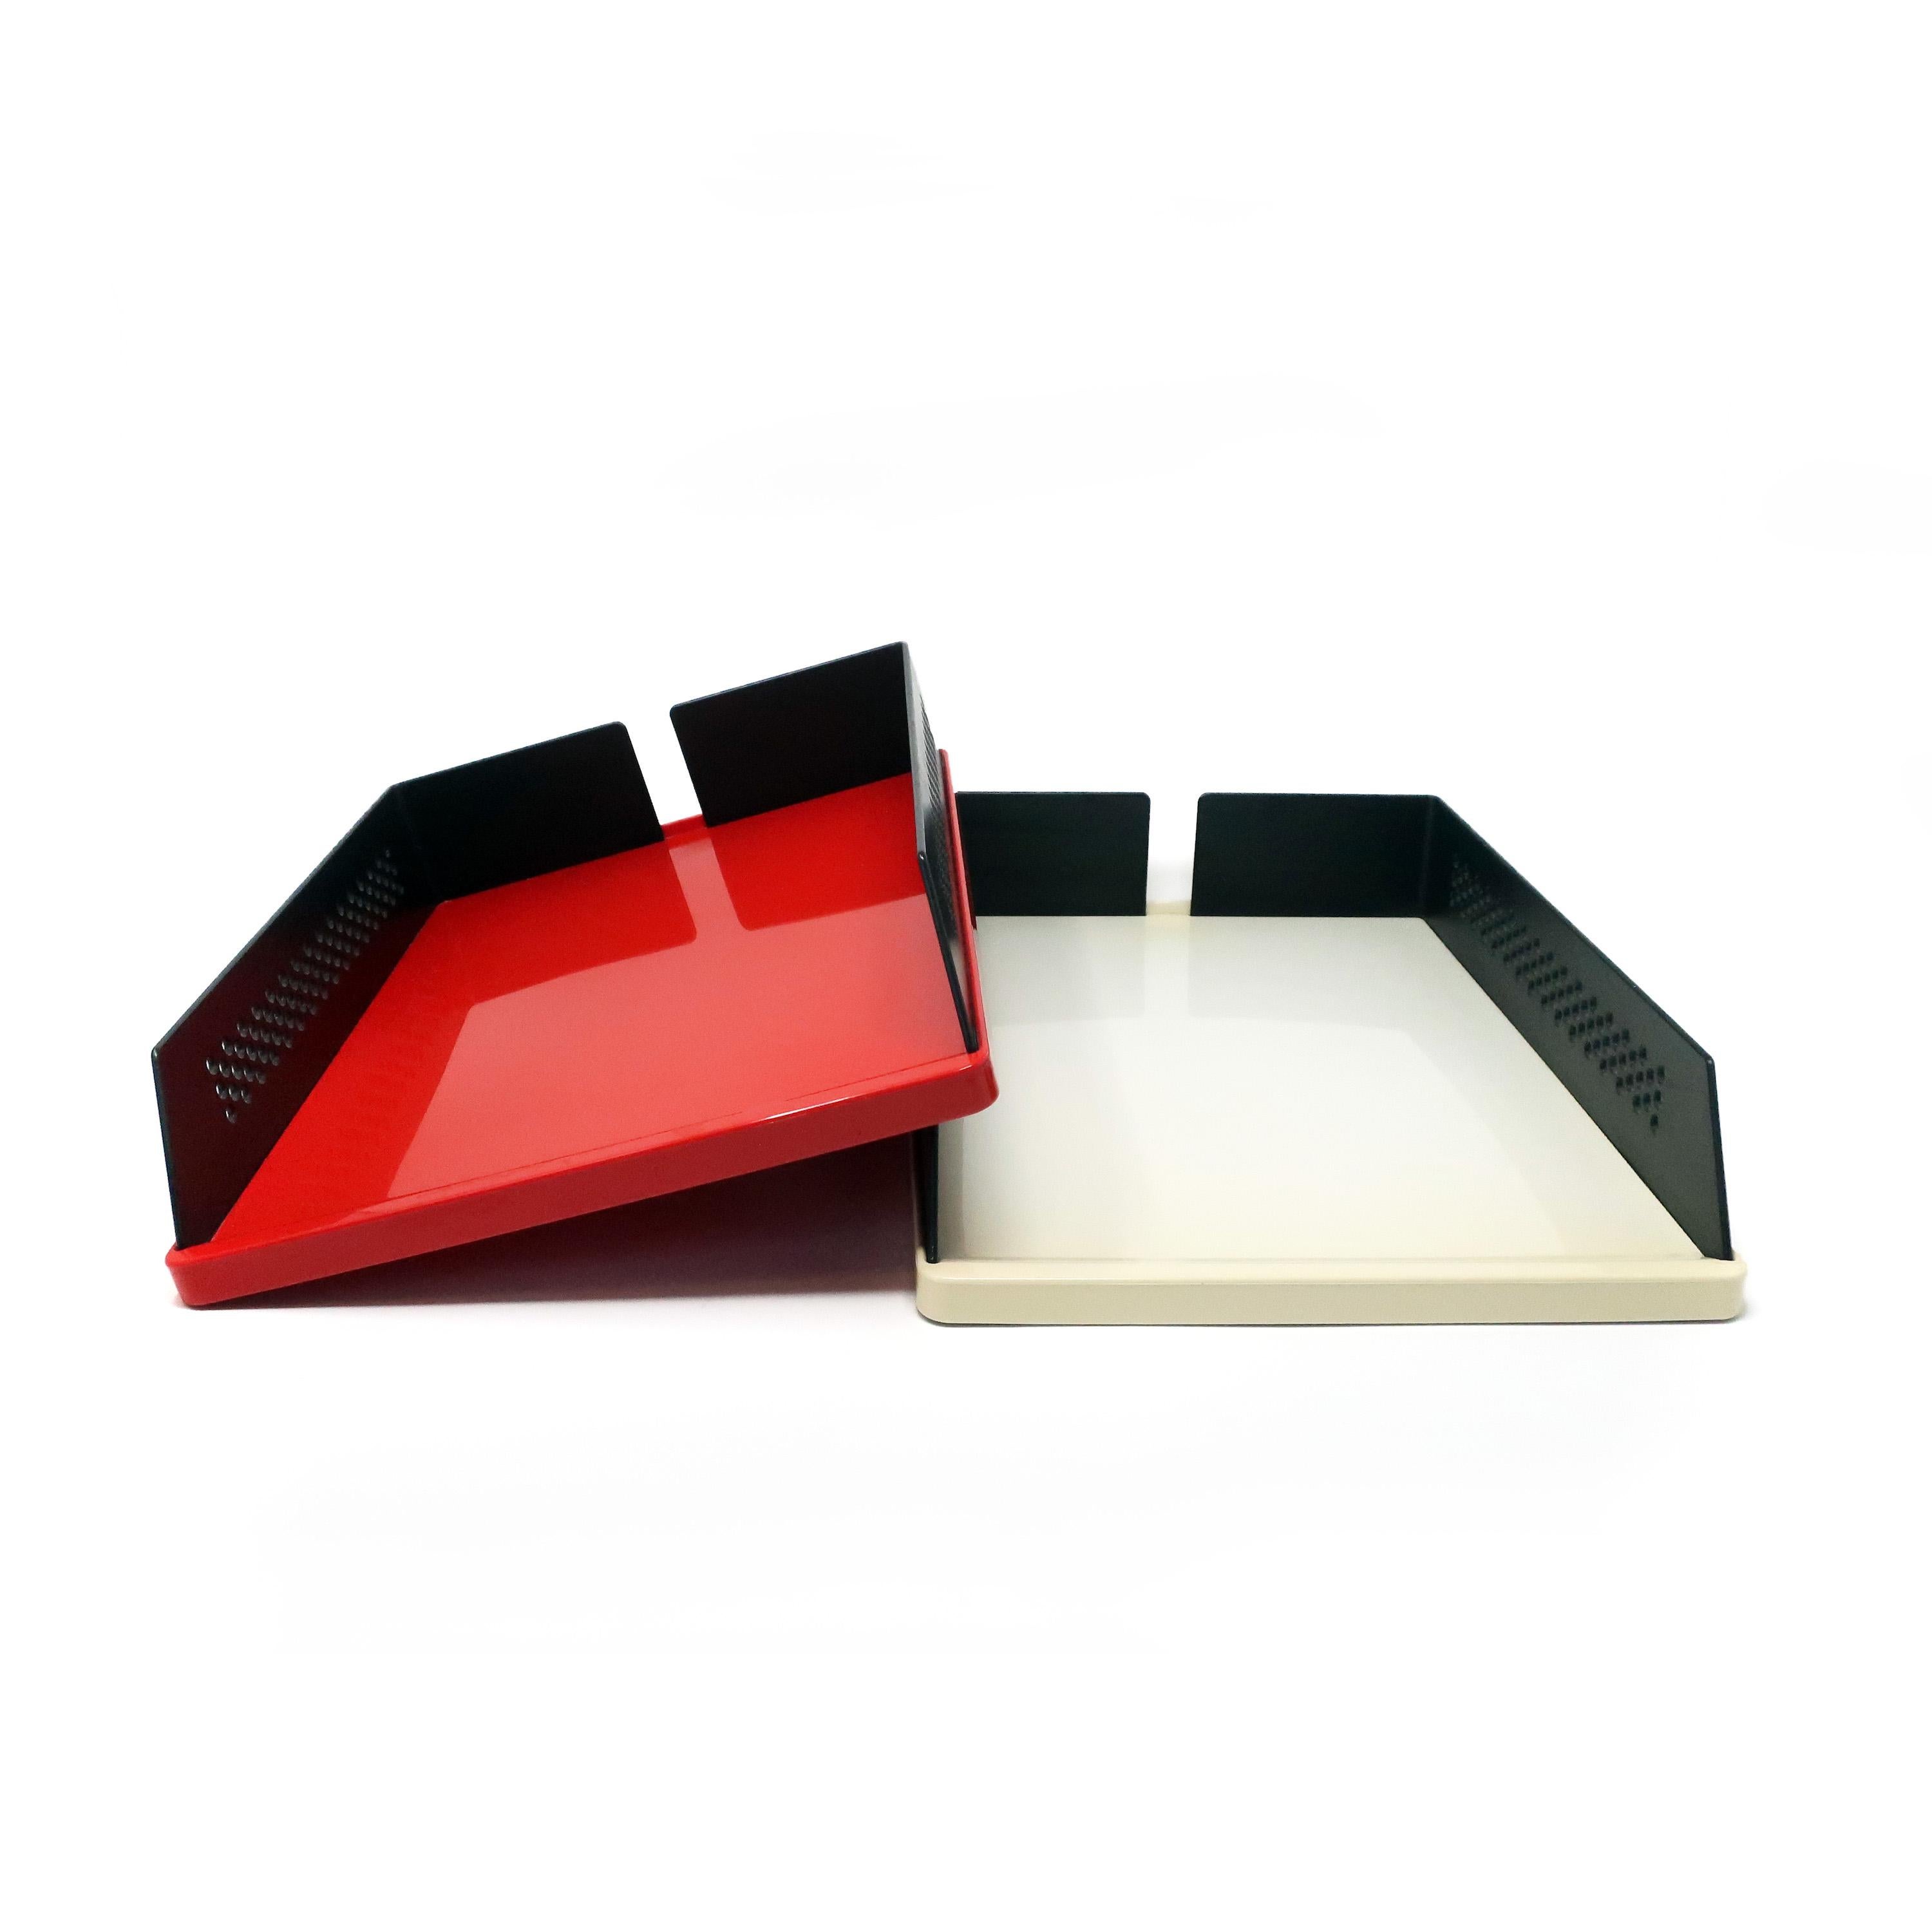 20th Century Pair of Red & White Babele 940 Trays by Barbieri & Marianelli for Rexite